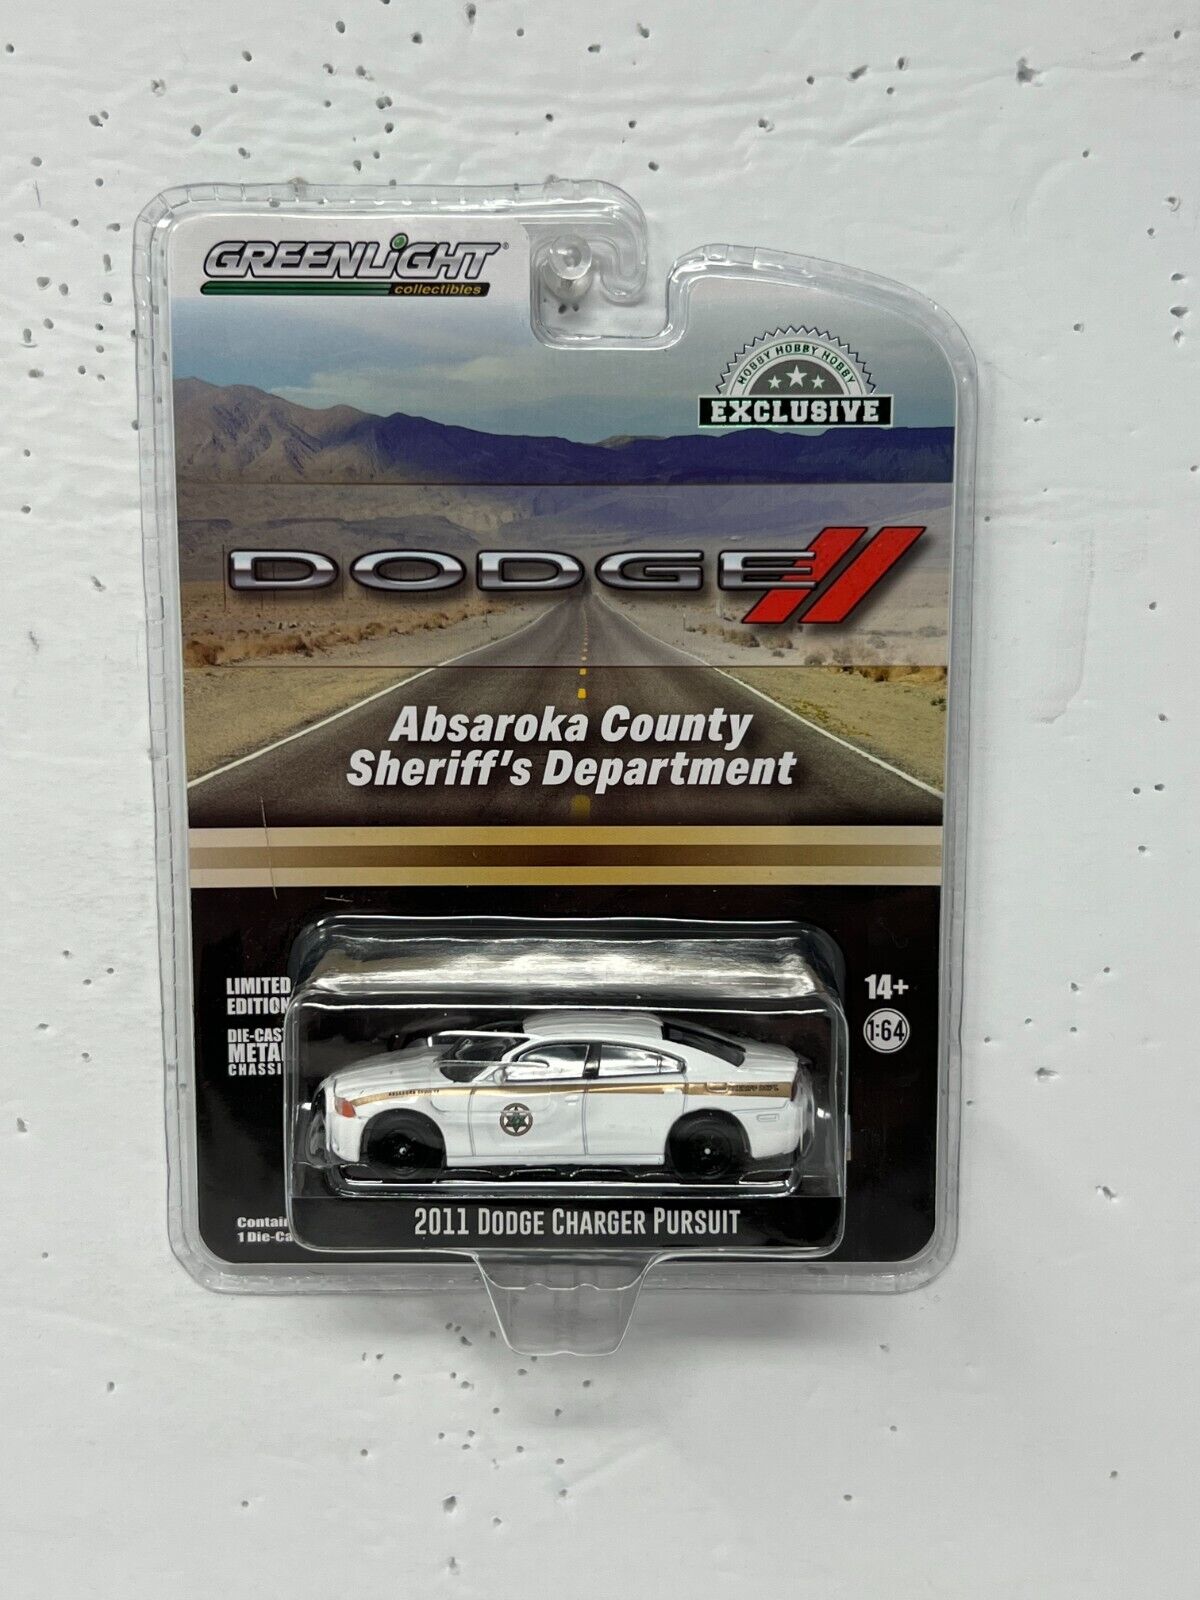 Greenlight Hobby Excl. Absaroka Sheriff 2011 Dodge Charger Pursuit 1:64 Diecast